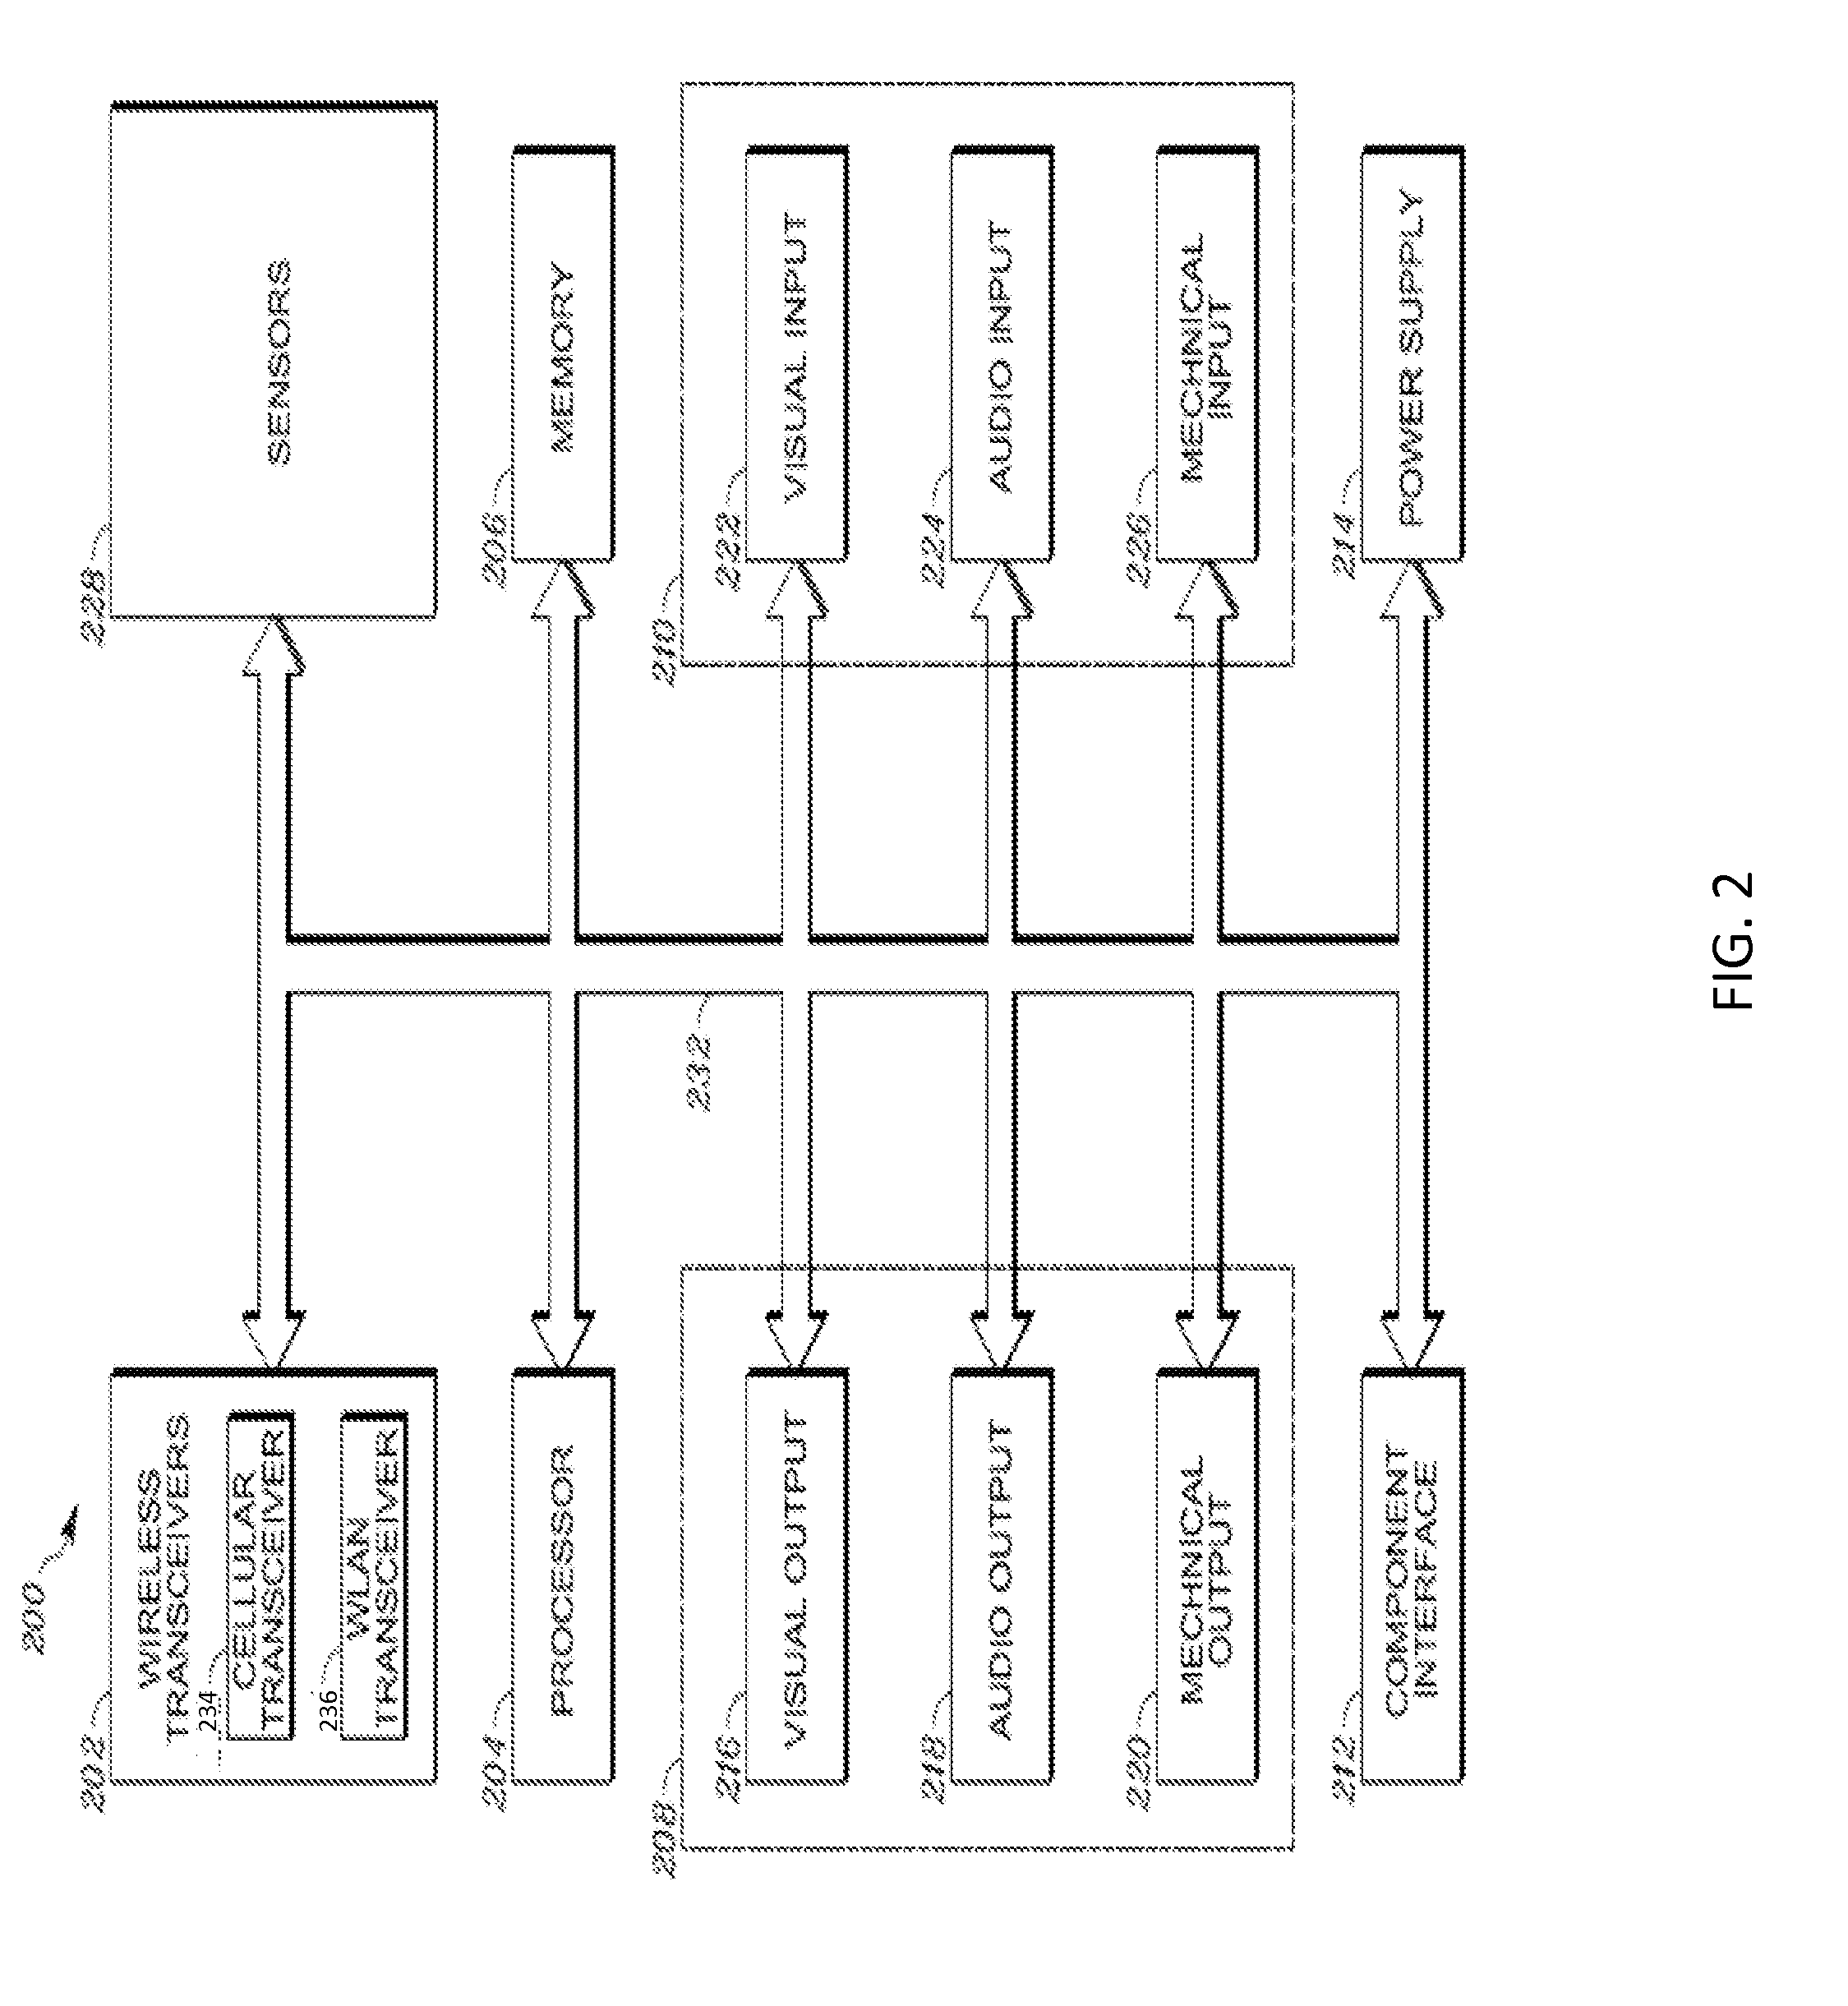 Method and Apparatus for Acoustically Characterizing an Environment in which an Electronic Device Resides